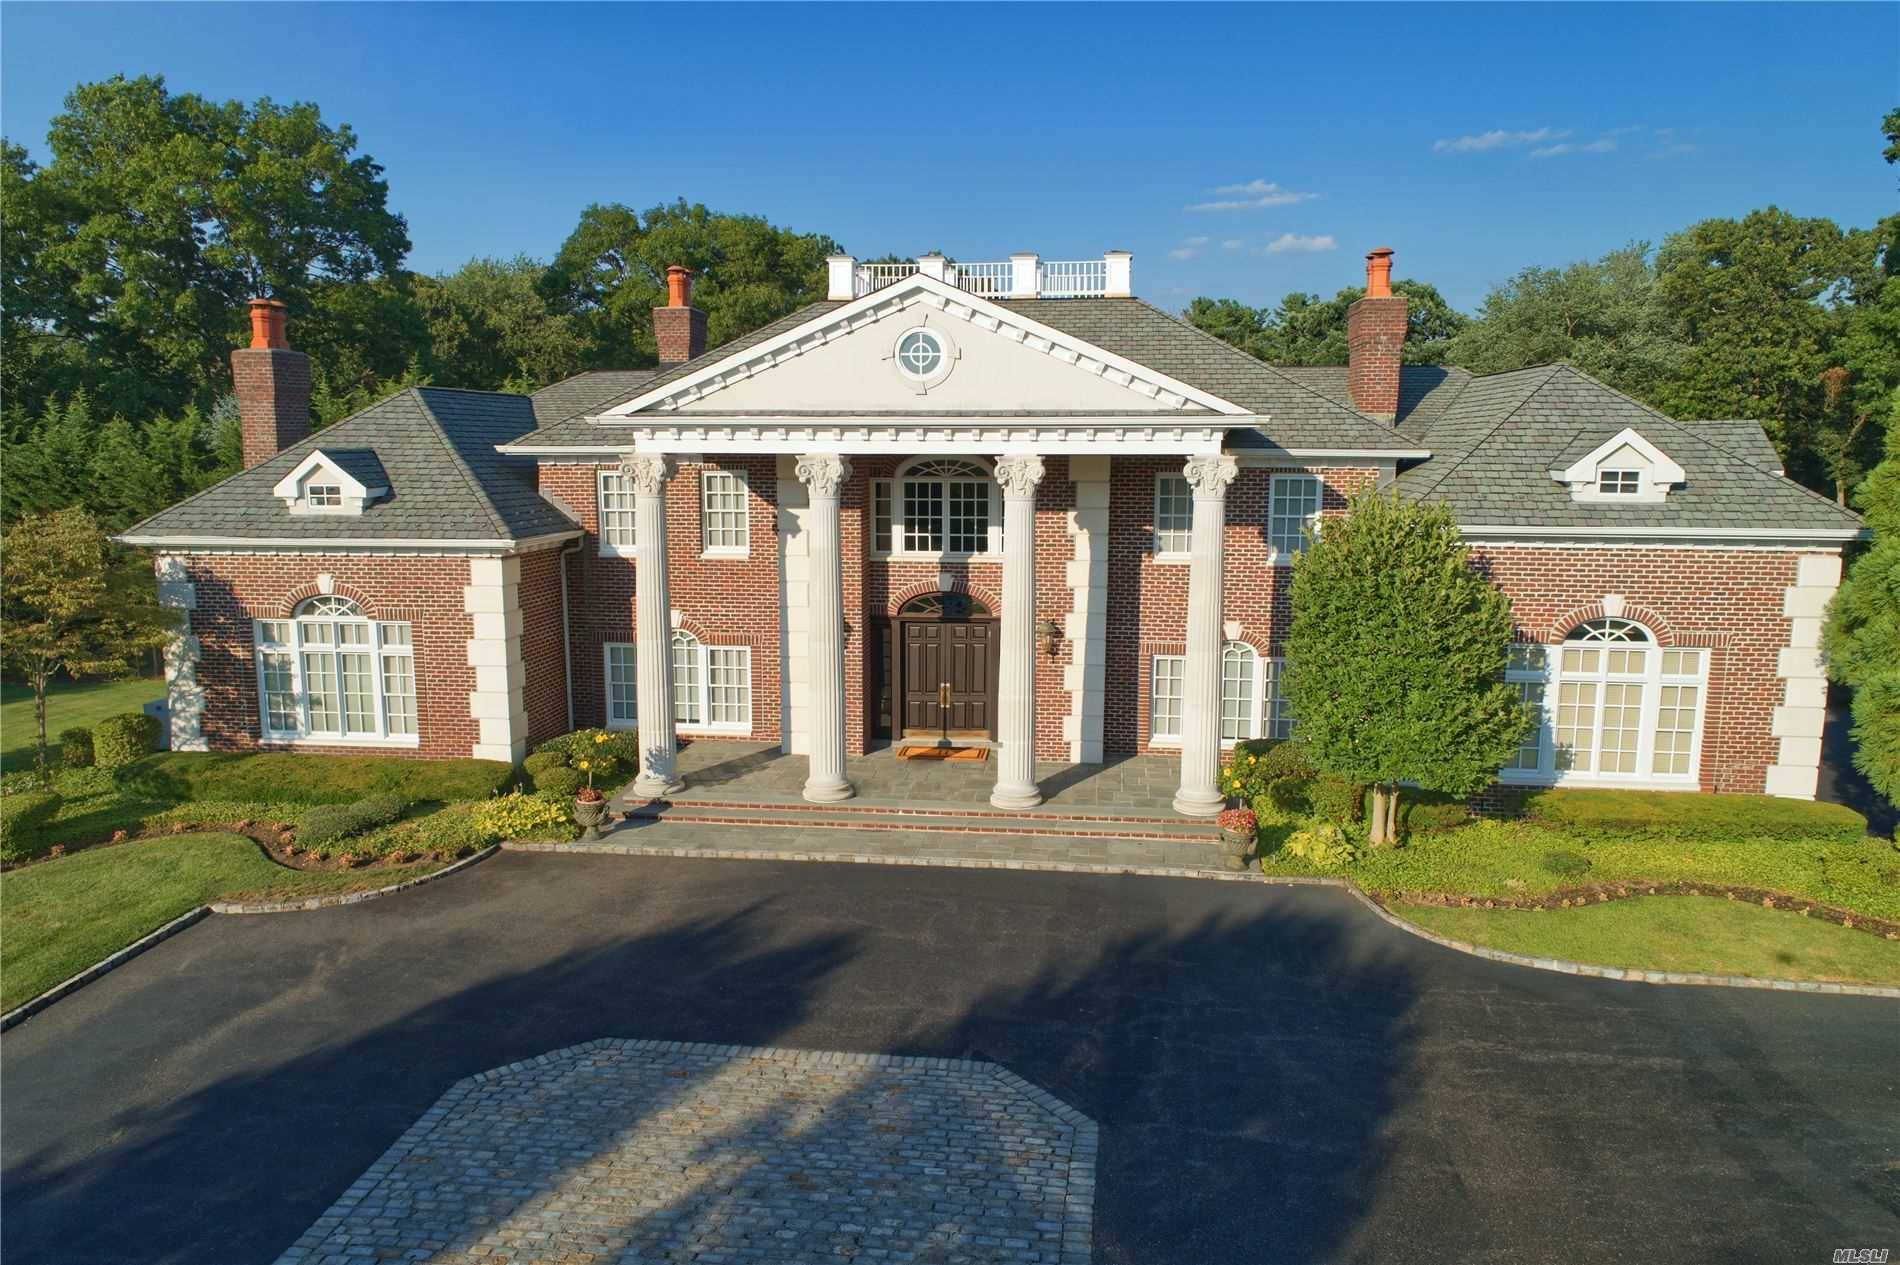 Magnificent Georgian brick colonial manor set beautifully within this private gated community in Old Westbury.